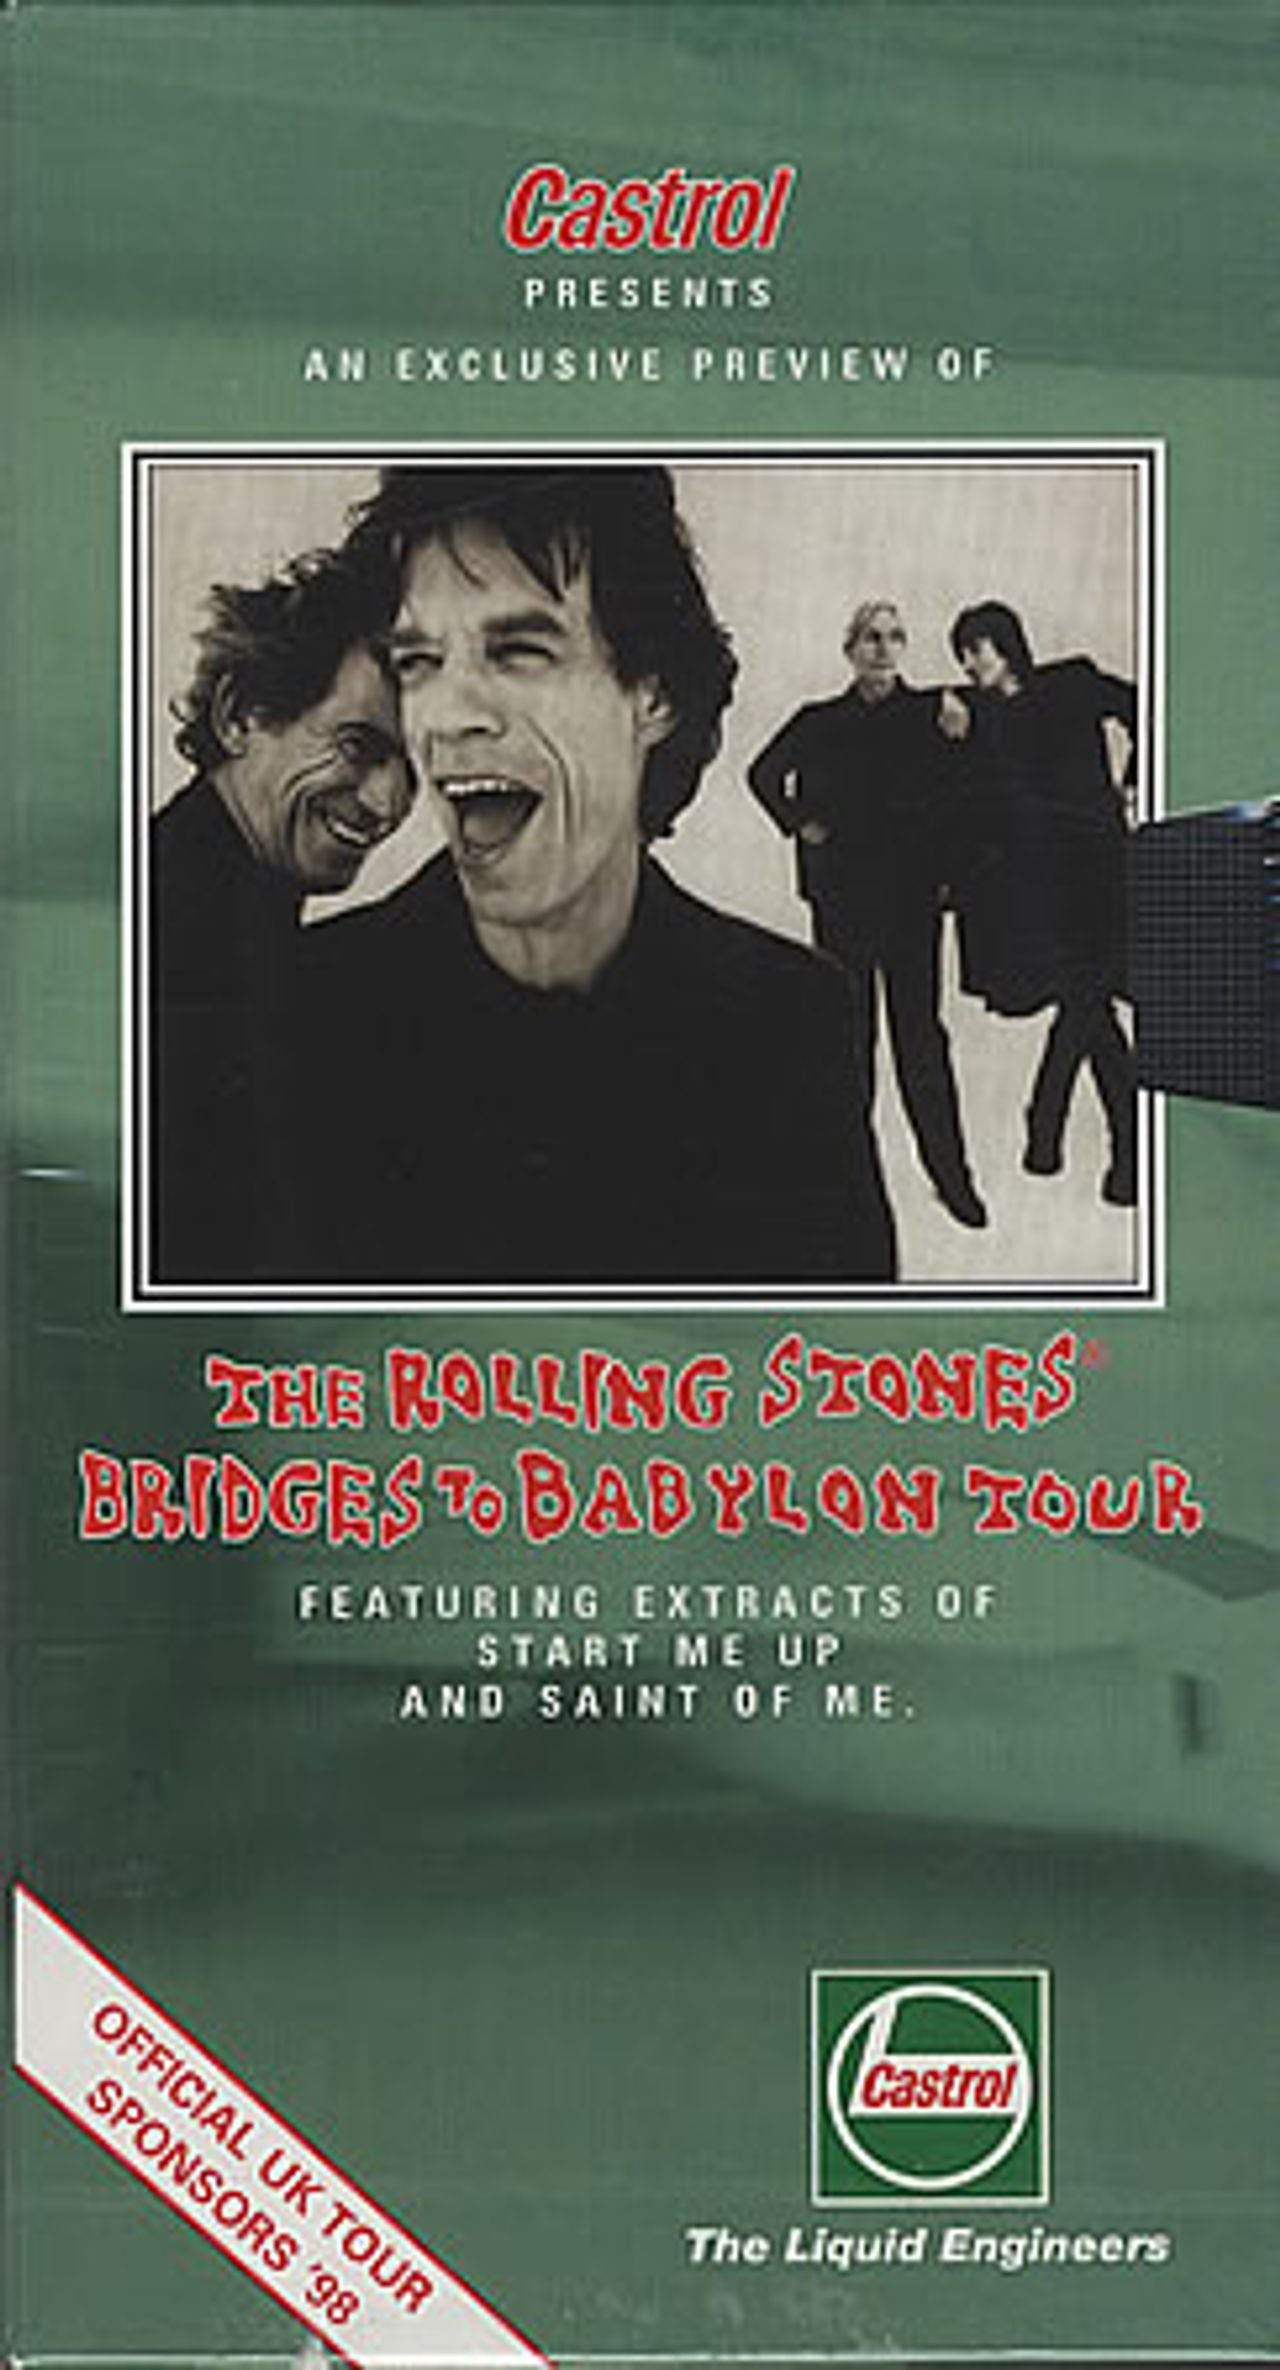 The Rolling Stones Castrol Presents...- Sealed UK Promo Video